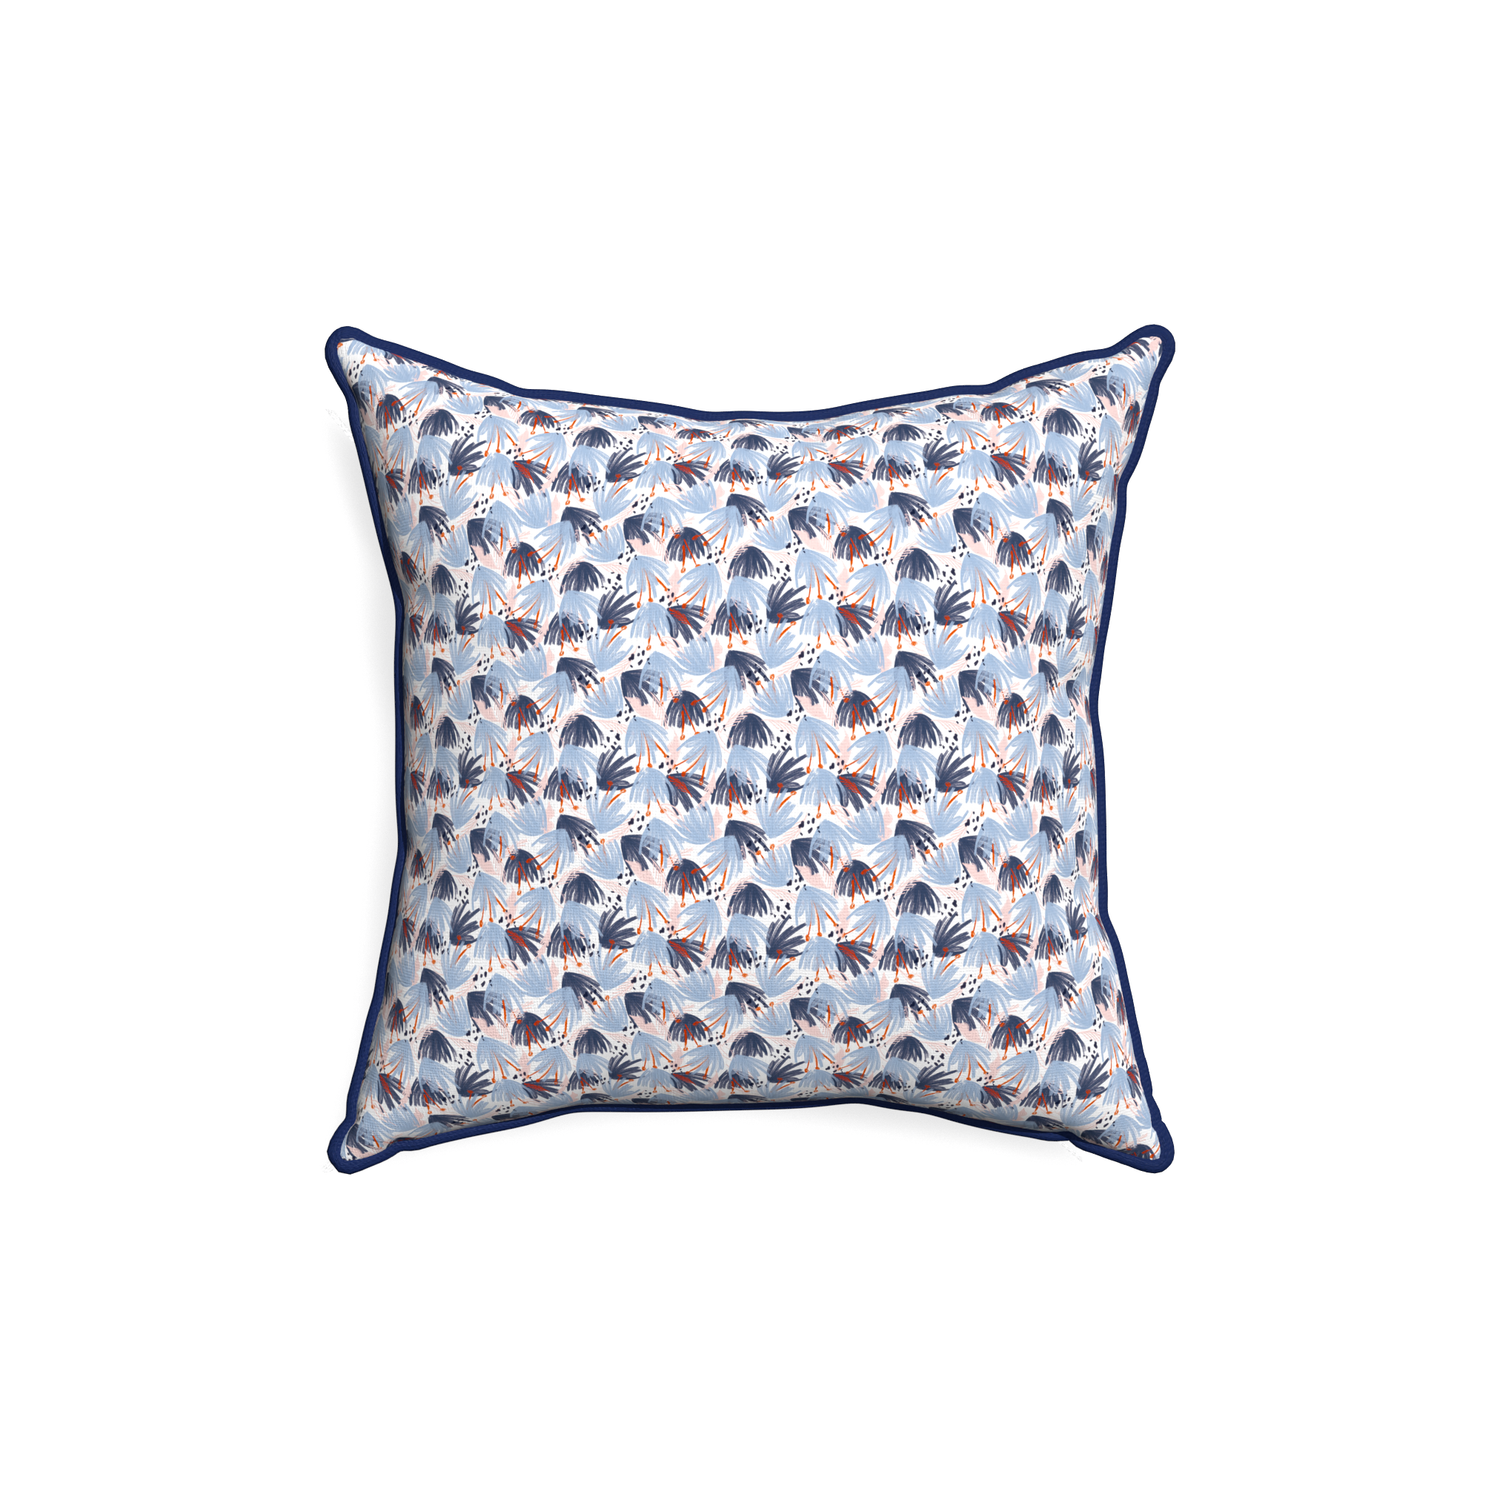 18-square eden blue custom pillow with midnight piping on white background